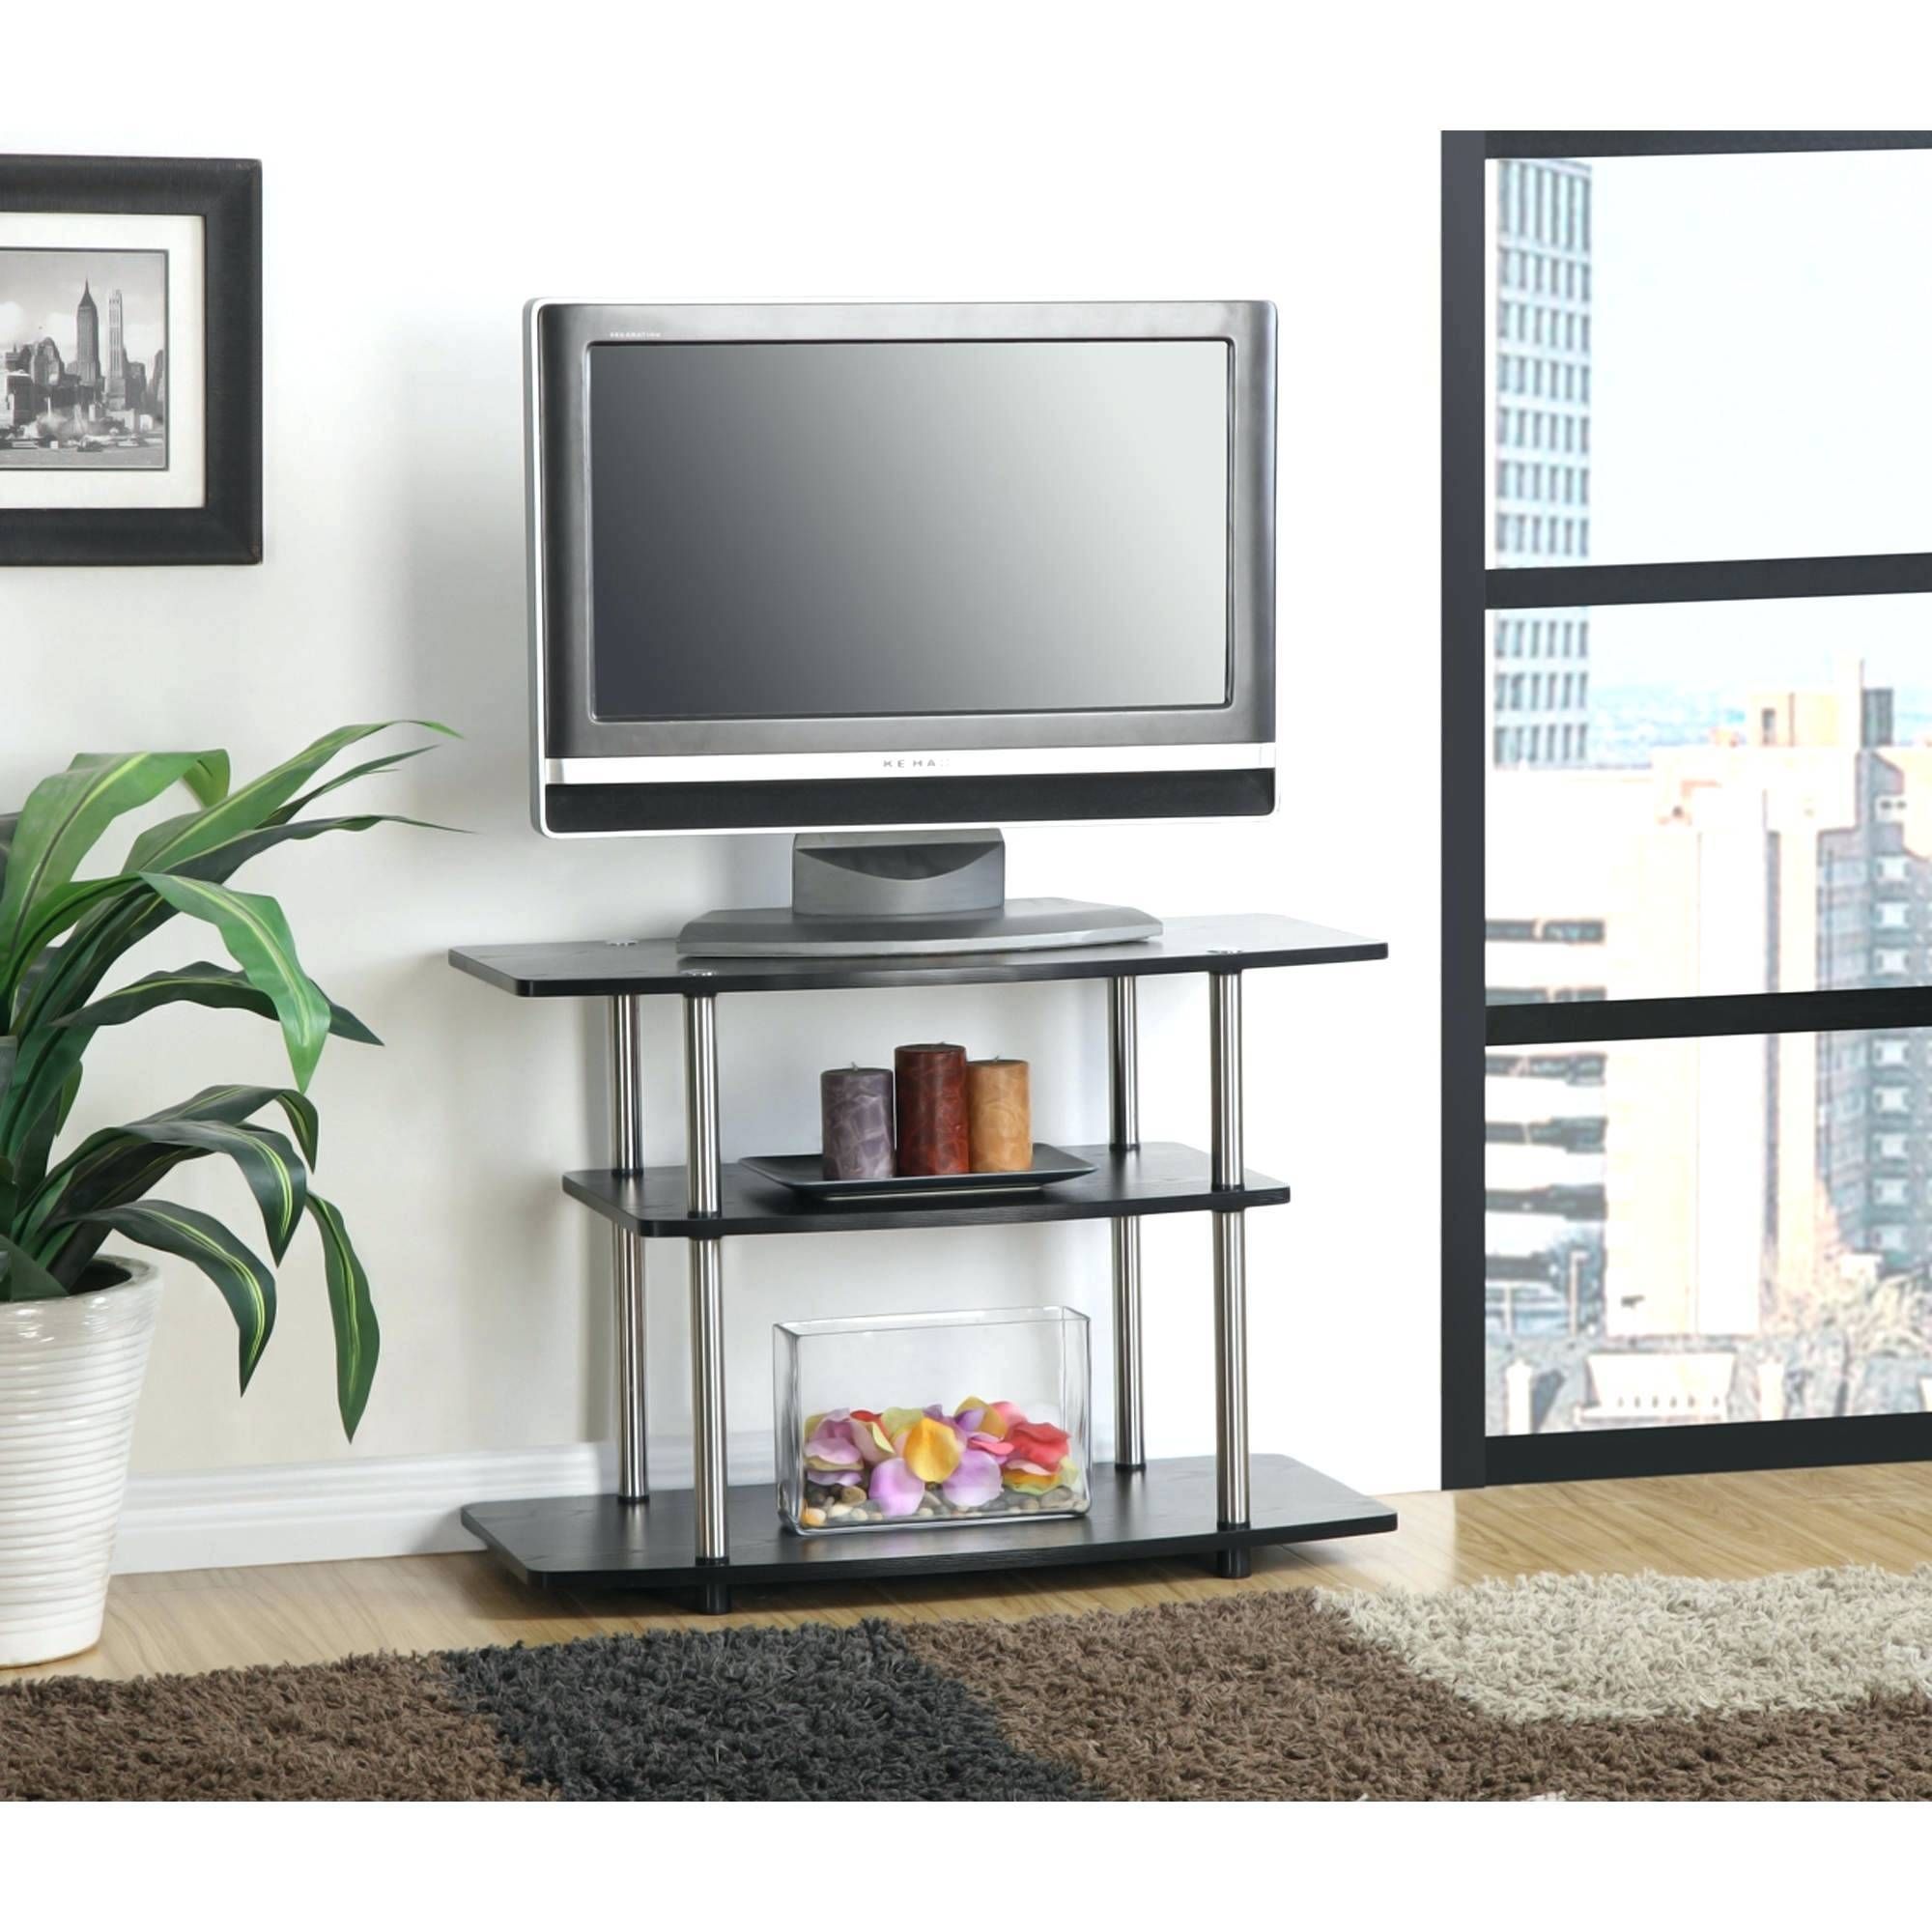 Tv Stand : Large Size Of Tv Standstall Thin Tv Stand And Standthin Inside Tall Skinny Tv Stands (View 8 of 15)